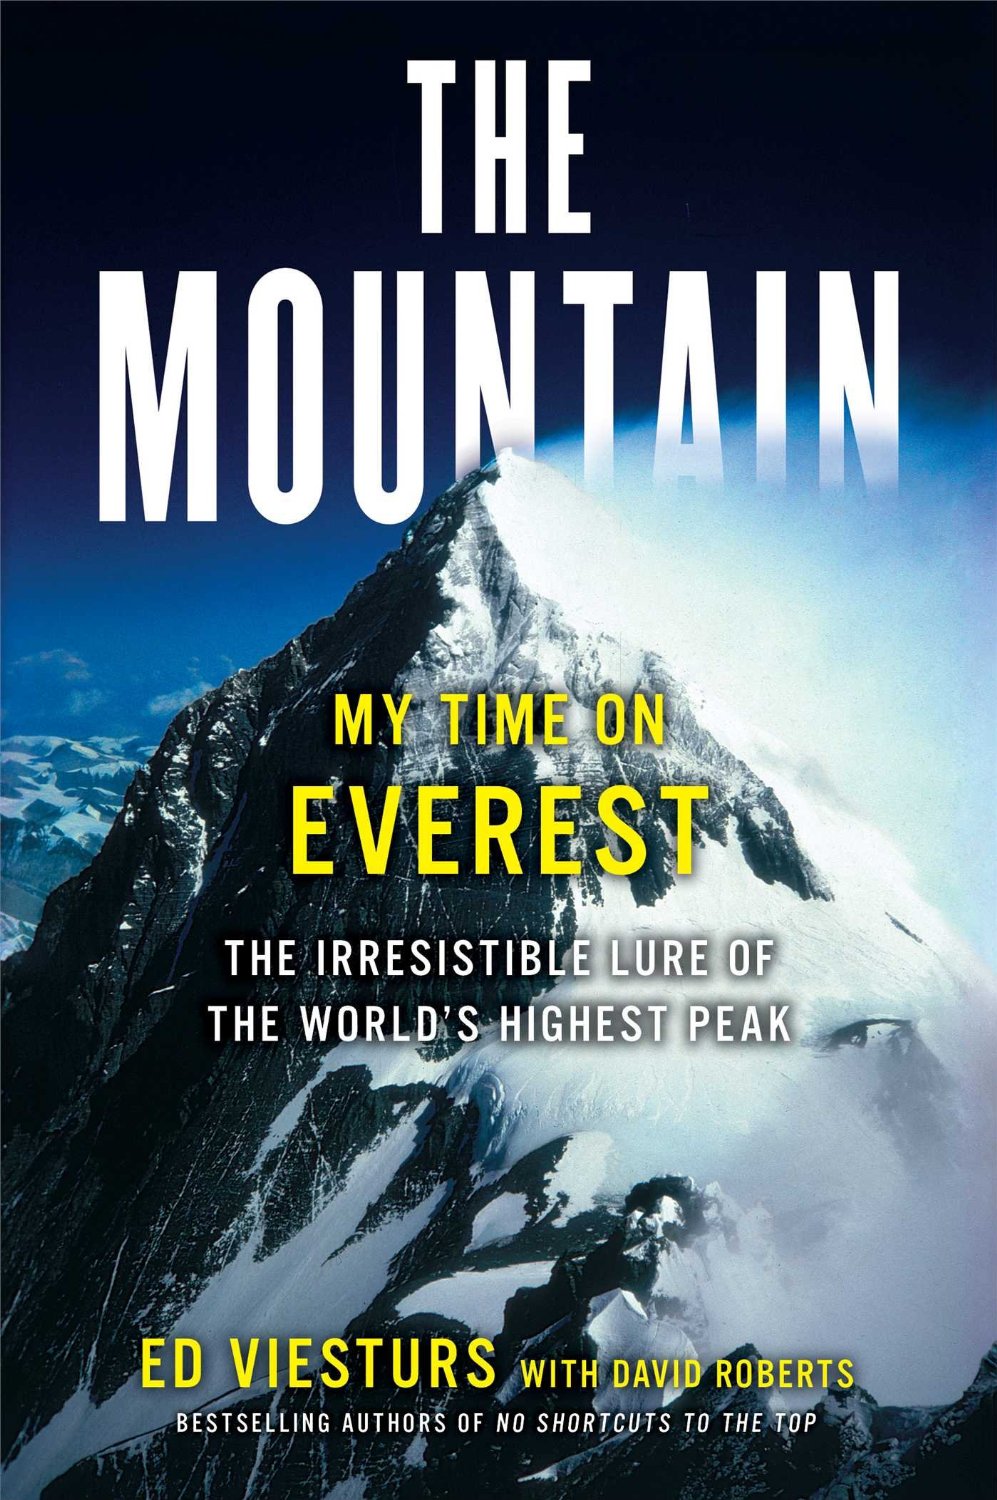 Book Titled: The Mountain: My Time on Everest